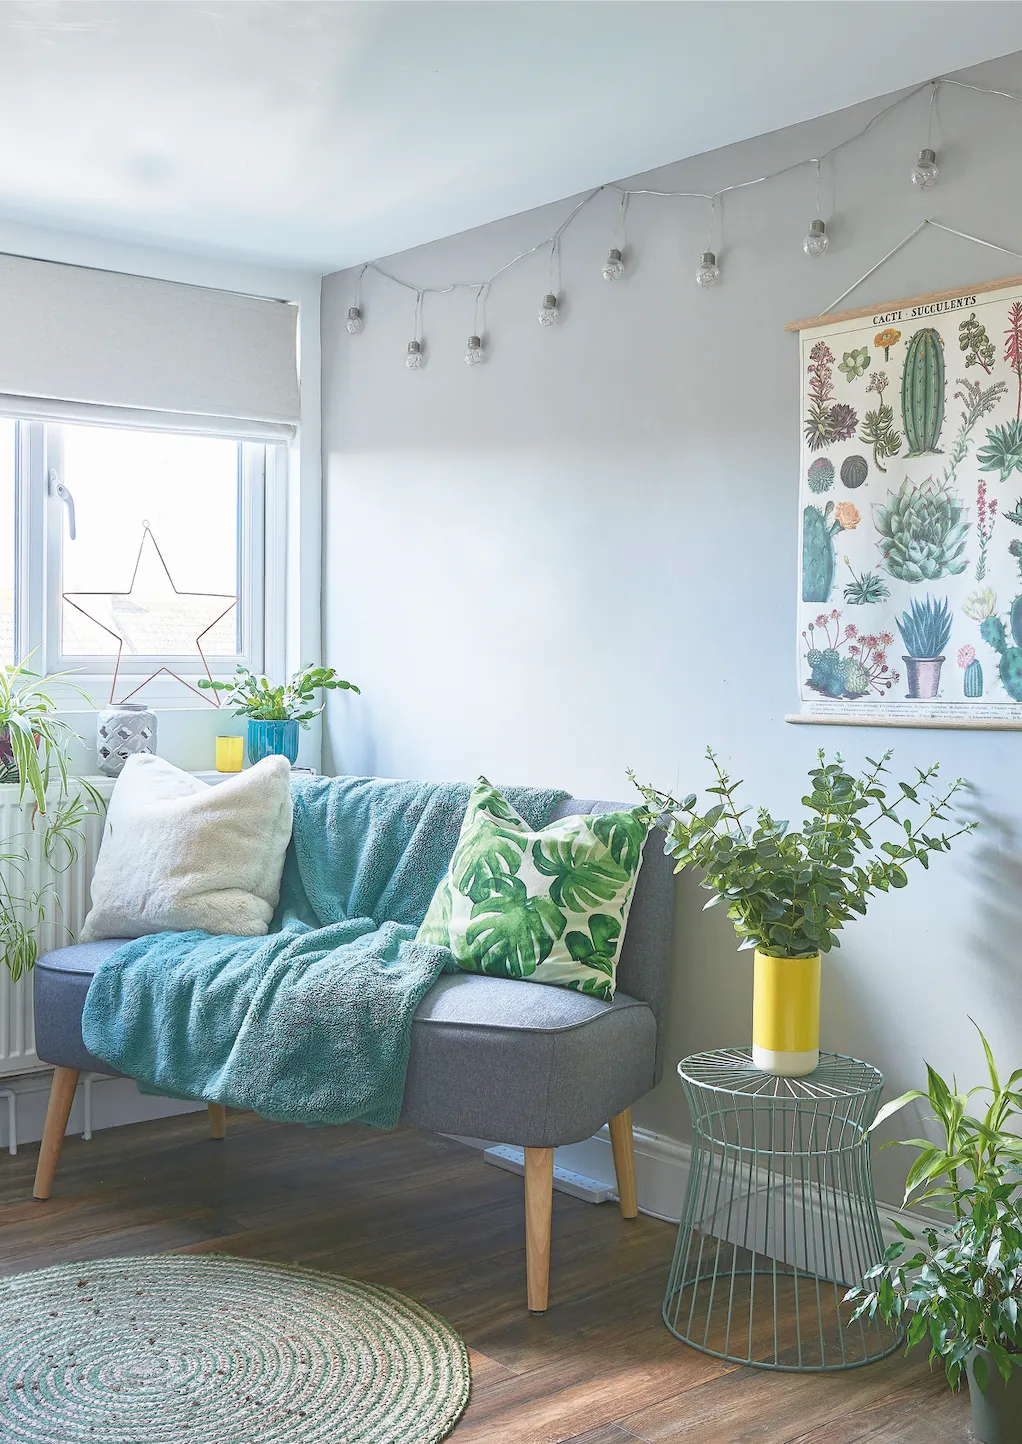 As well as lots of real plants, Nikki uses leafy prints to bring the outdoors in; both painted and real foliage make this corner of her bedroom feel fresh and inviting